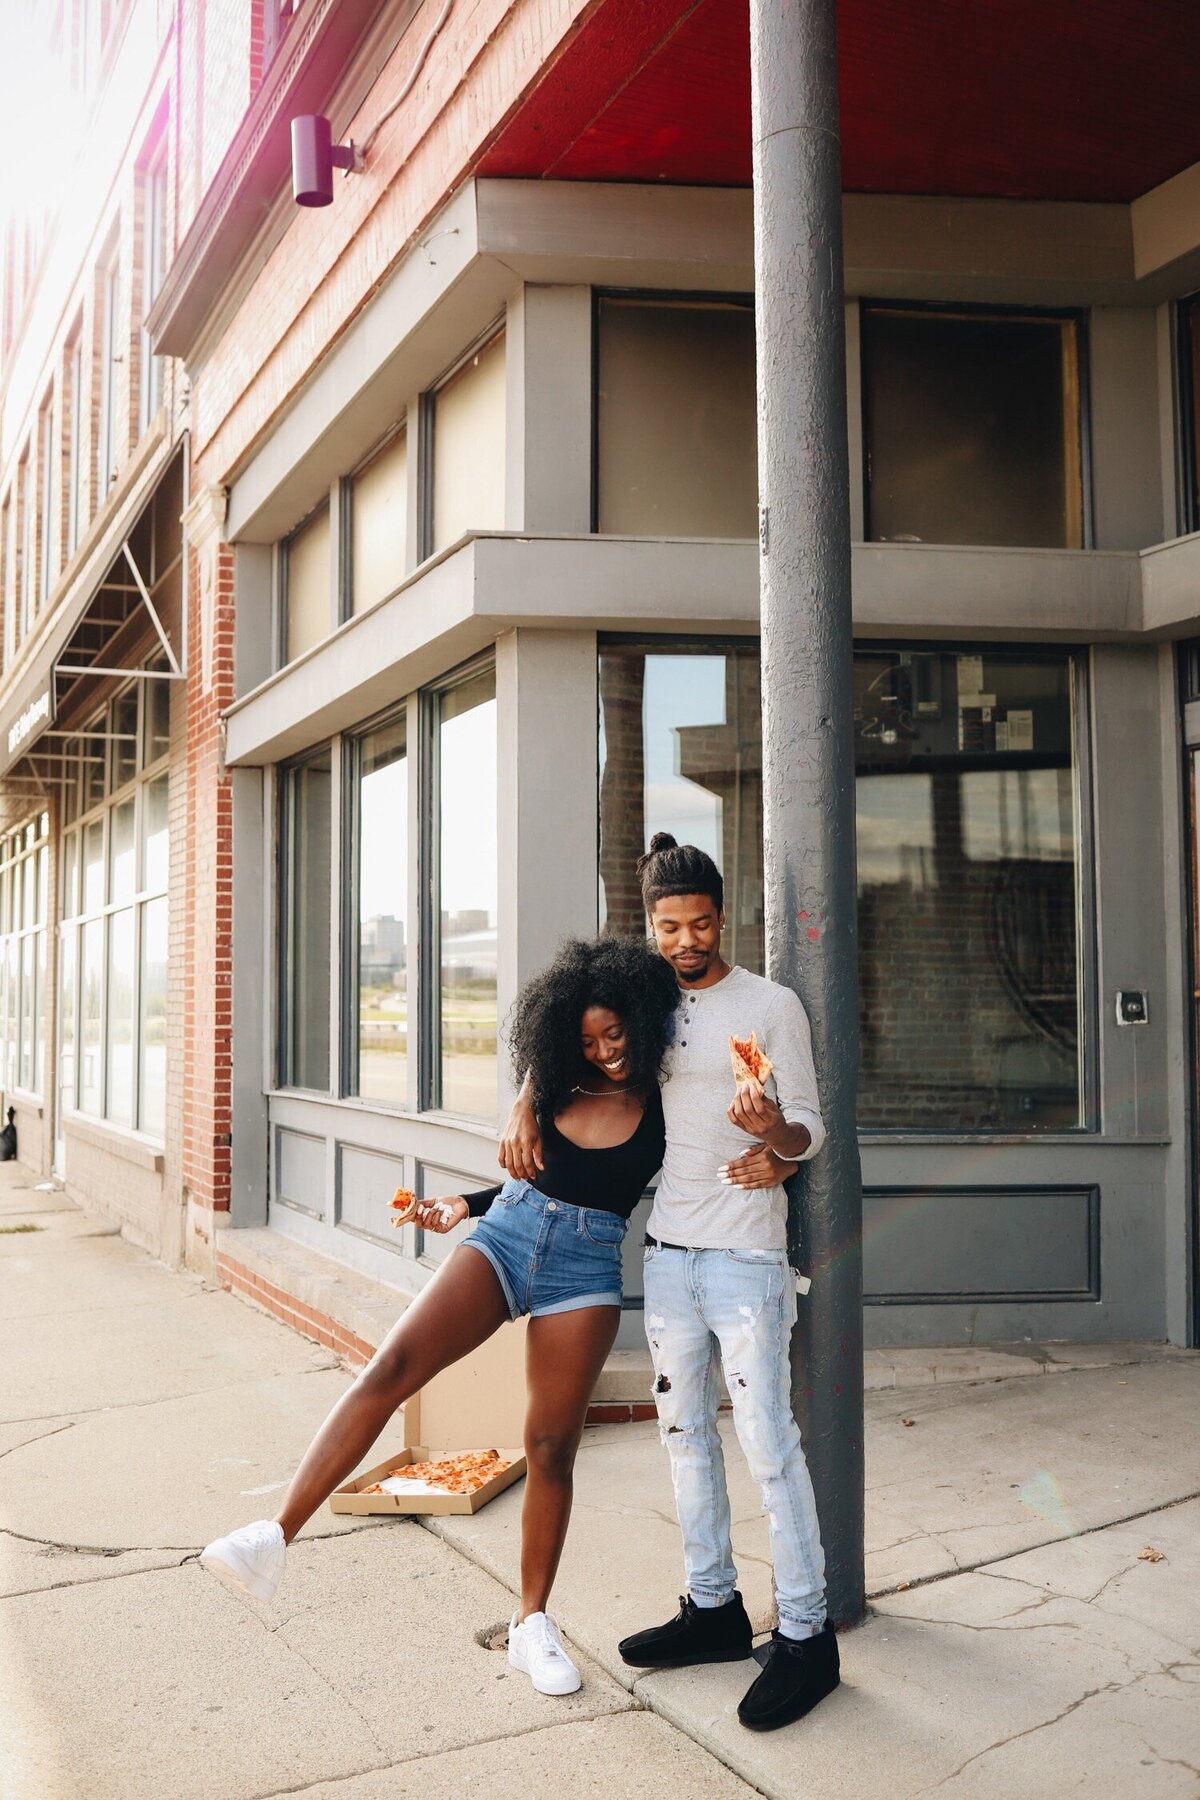 Black-and-in-love-couple-enjoying-pizza-from-Supinos-in-Detroit-MI-Eastern-Market-Area.-Photo-by-Chettara-of-Chettara-T.-Photography. (2)